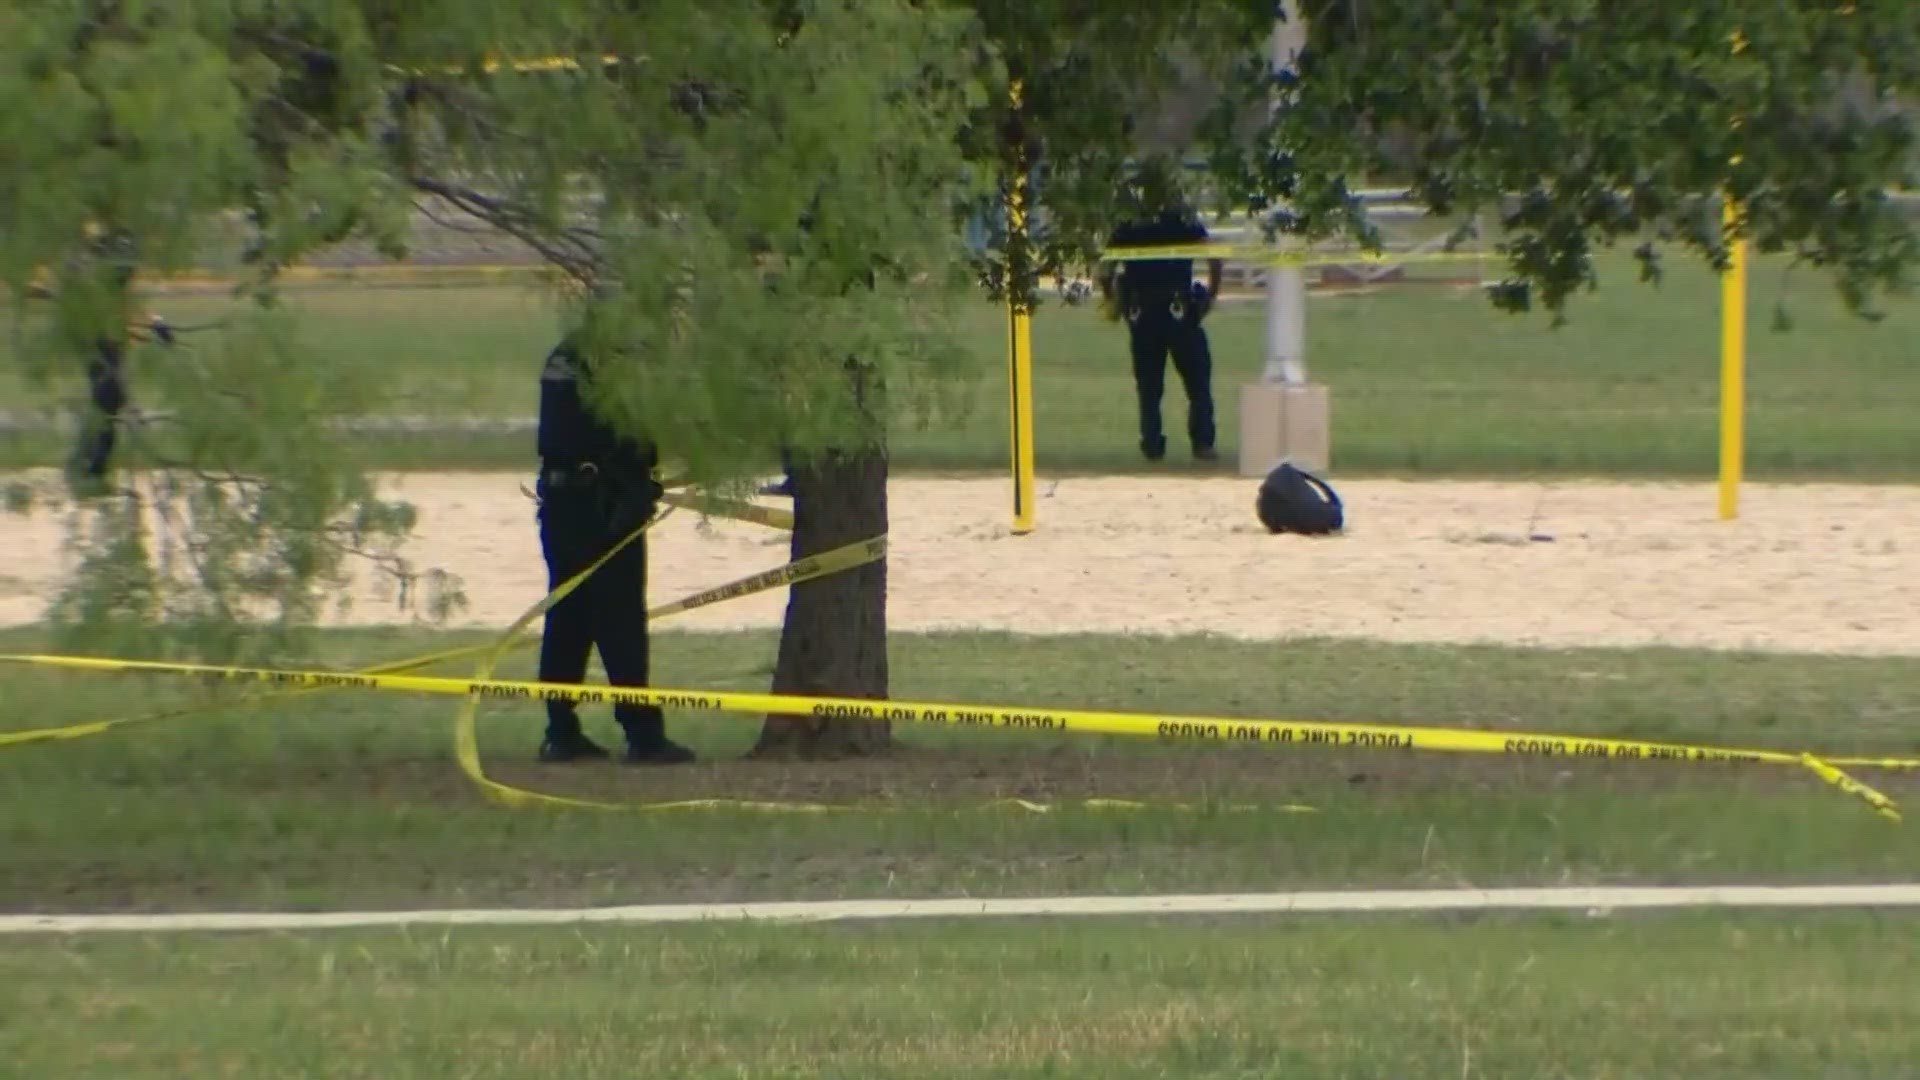 SAPD said that when officers arrived at a south-side park on Wednesday afternoon, a suspect fired at them and was injured by officers returning fire.